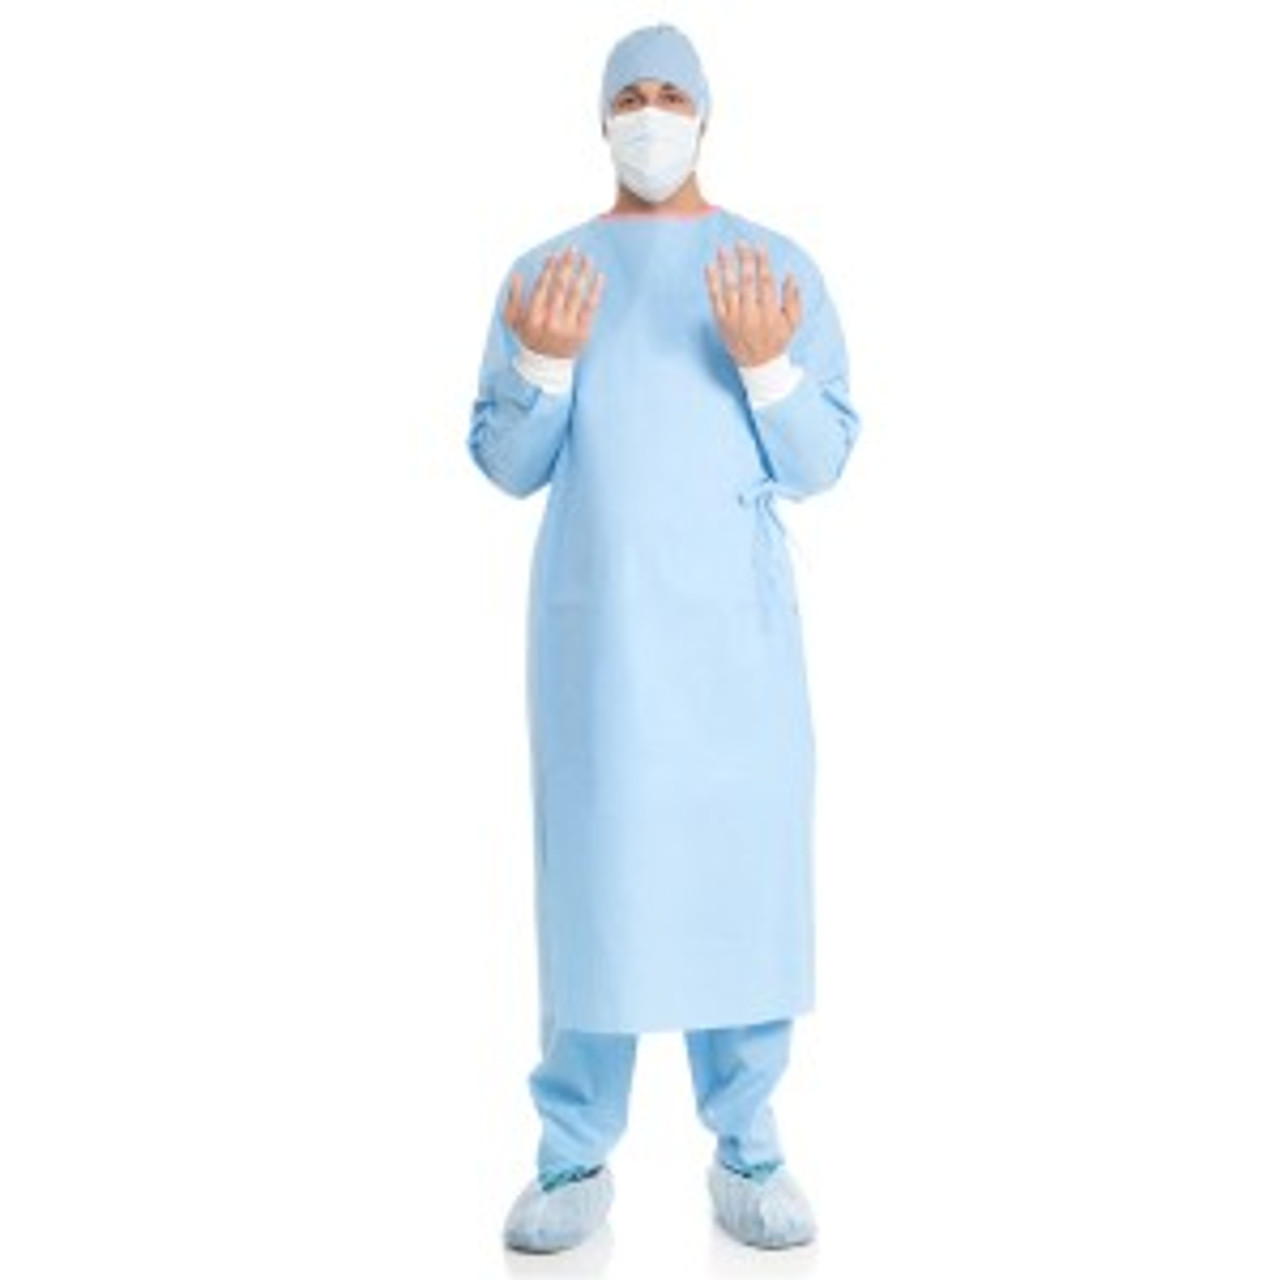 Halyard Impervious Gown ULTRA Zoned Impervious Surgical X-Large, No Towel, Non-Sterile, 8/bx, 4 bx/cs